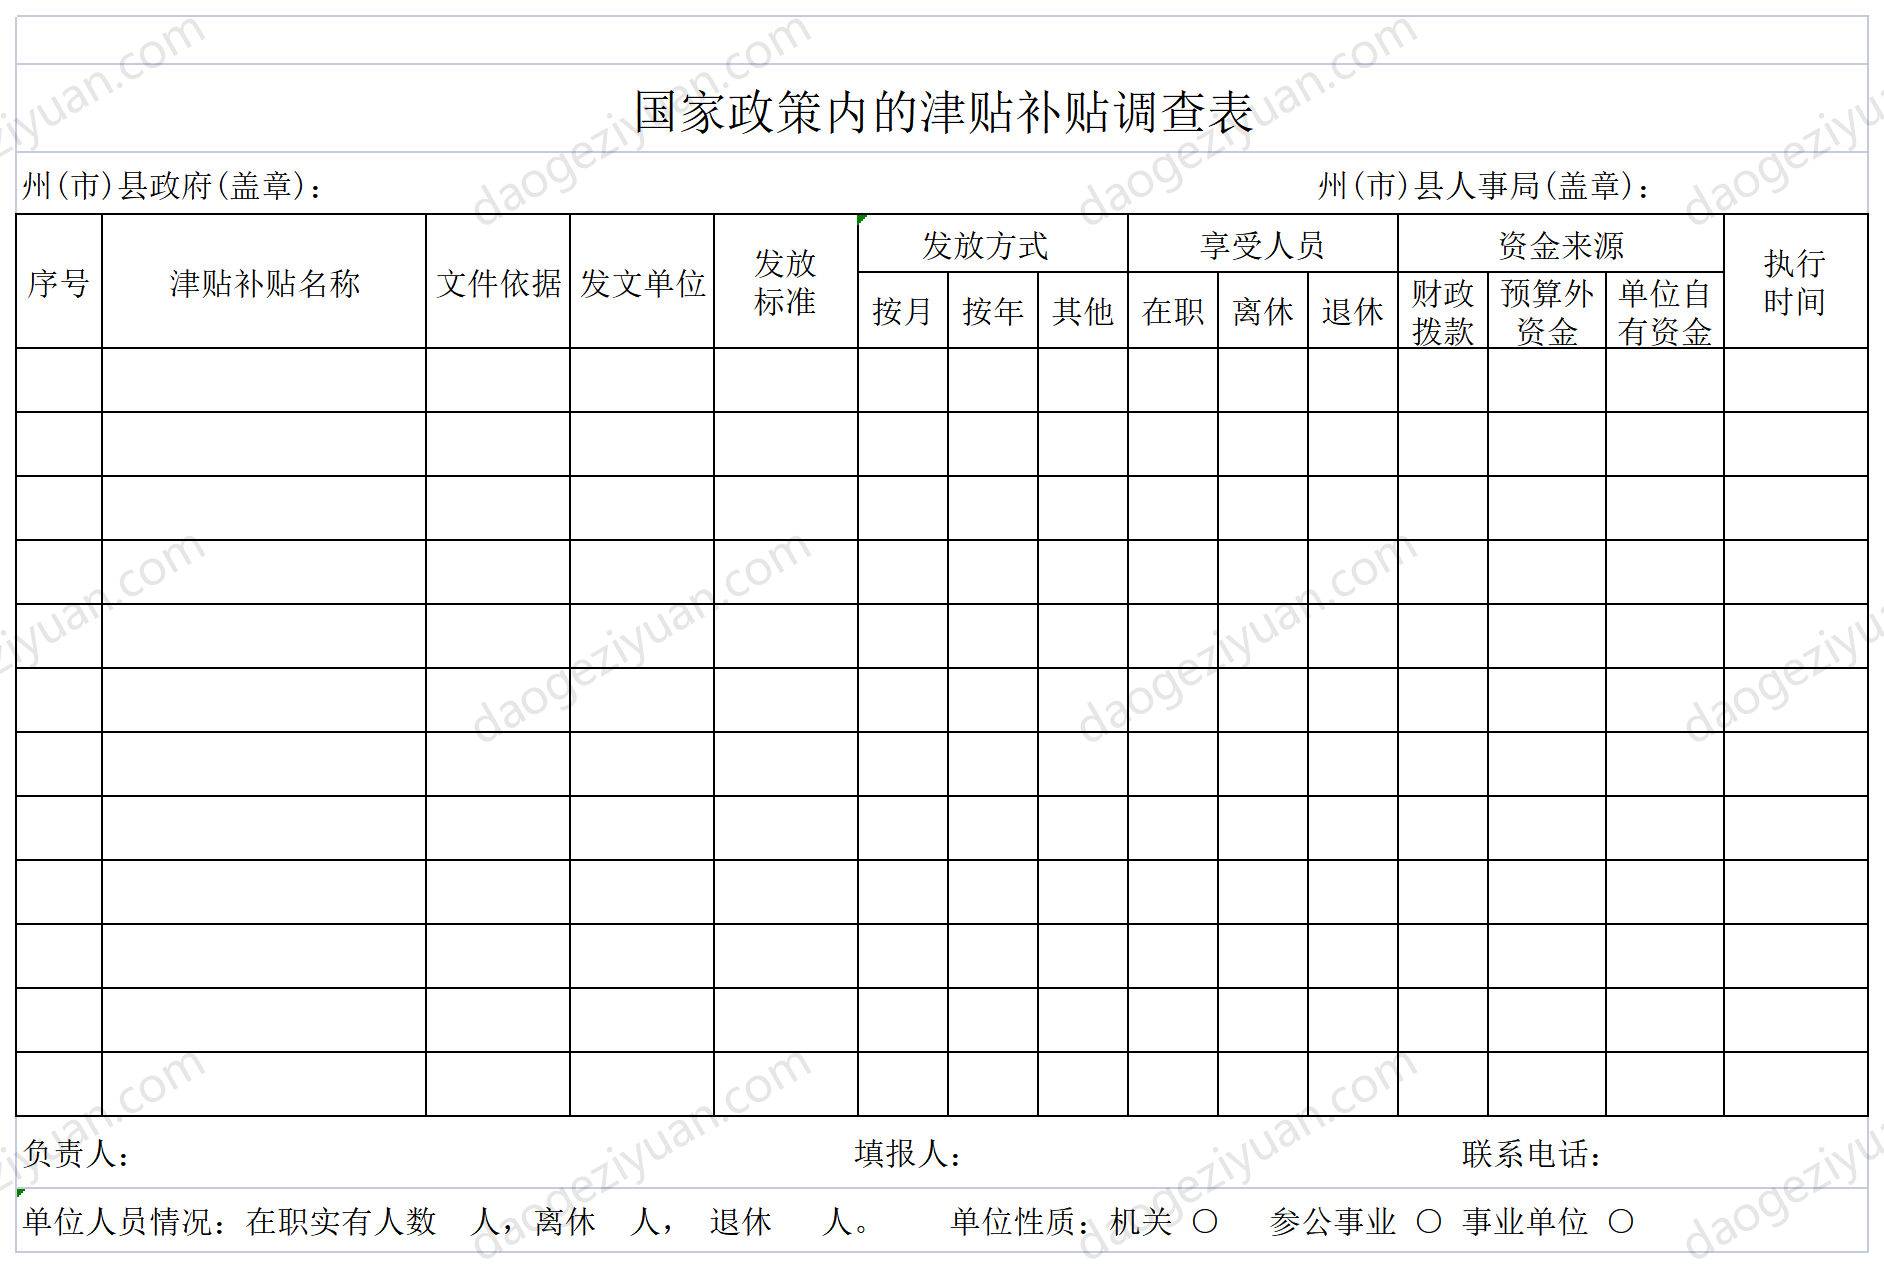 Subsidy Subsidy Survey Form in National Policy.xls